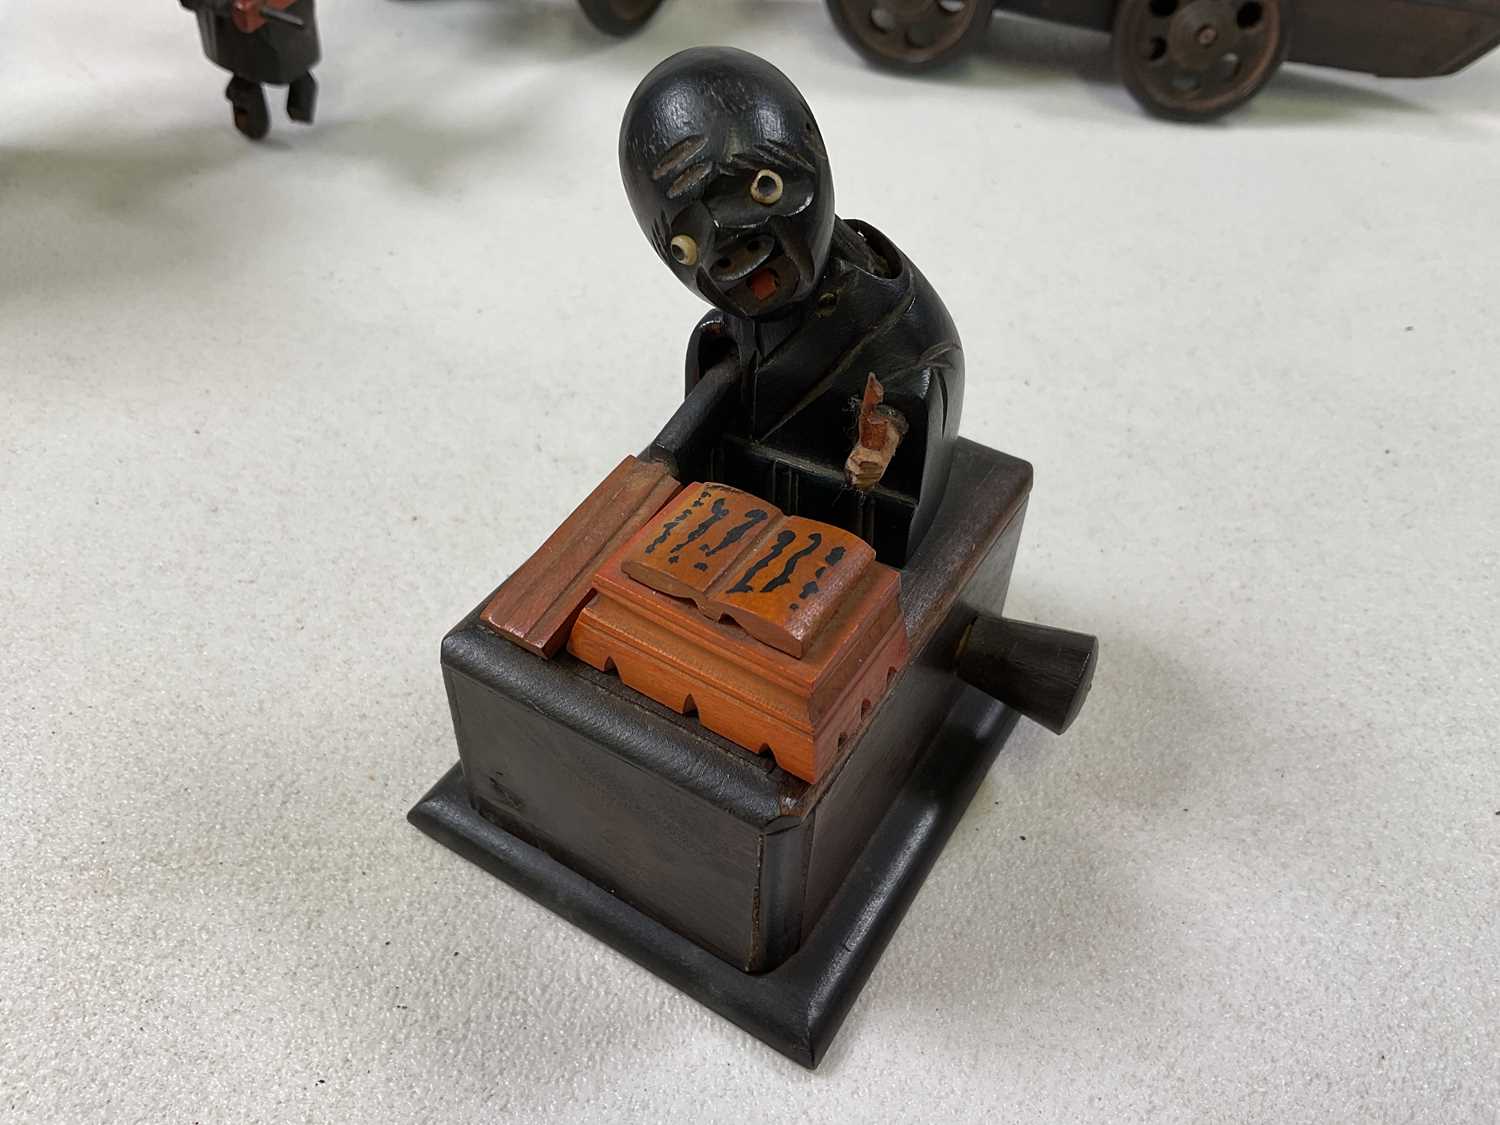 KOBE; six Japanese early 20th century novelty wooden toys, (in af condition). - Image 4 of 7